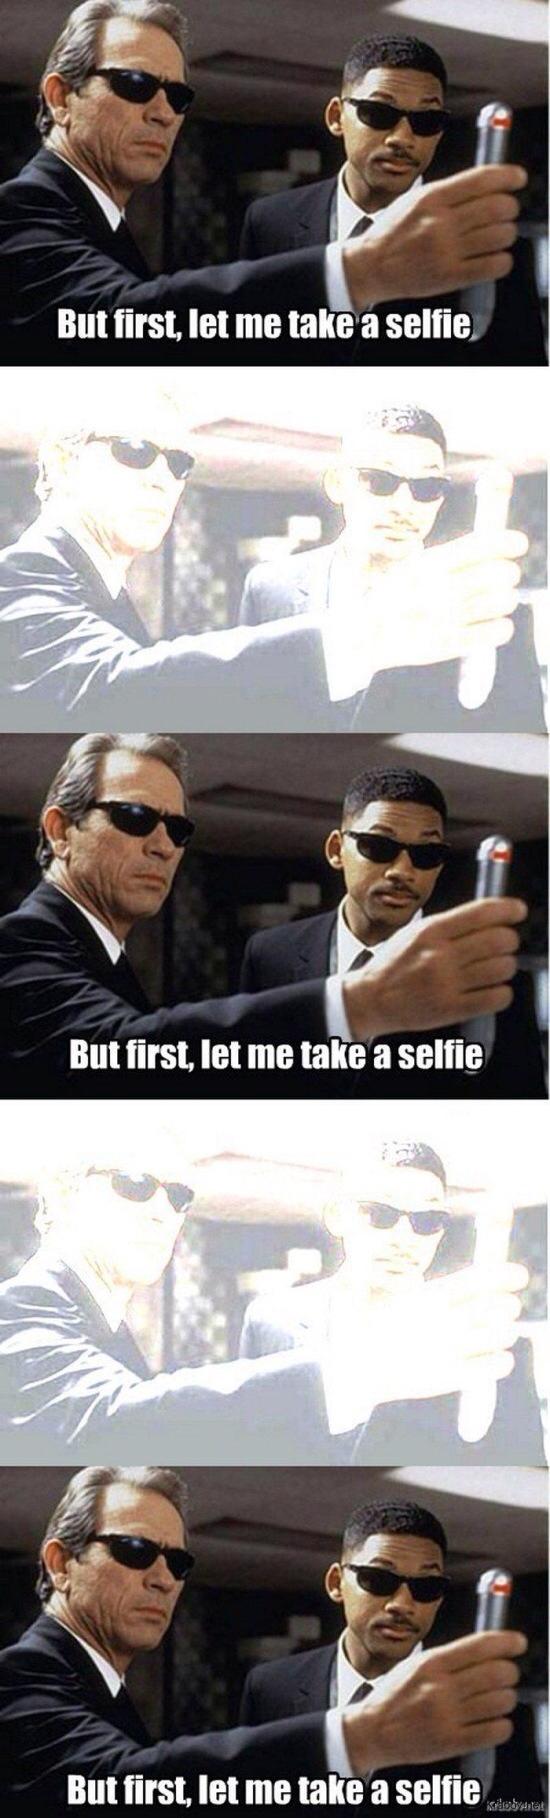 But first, let me take a selfie.